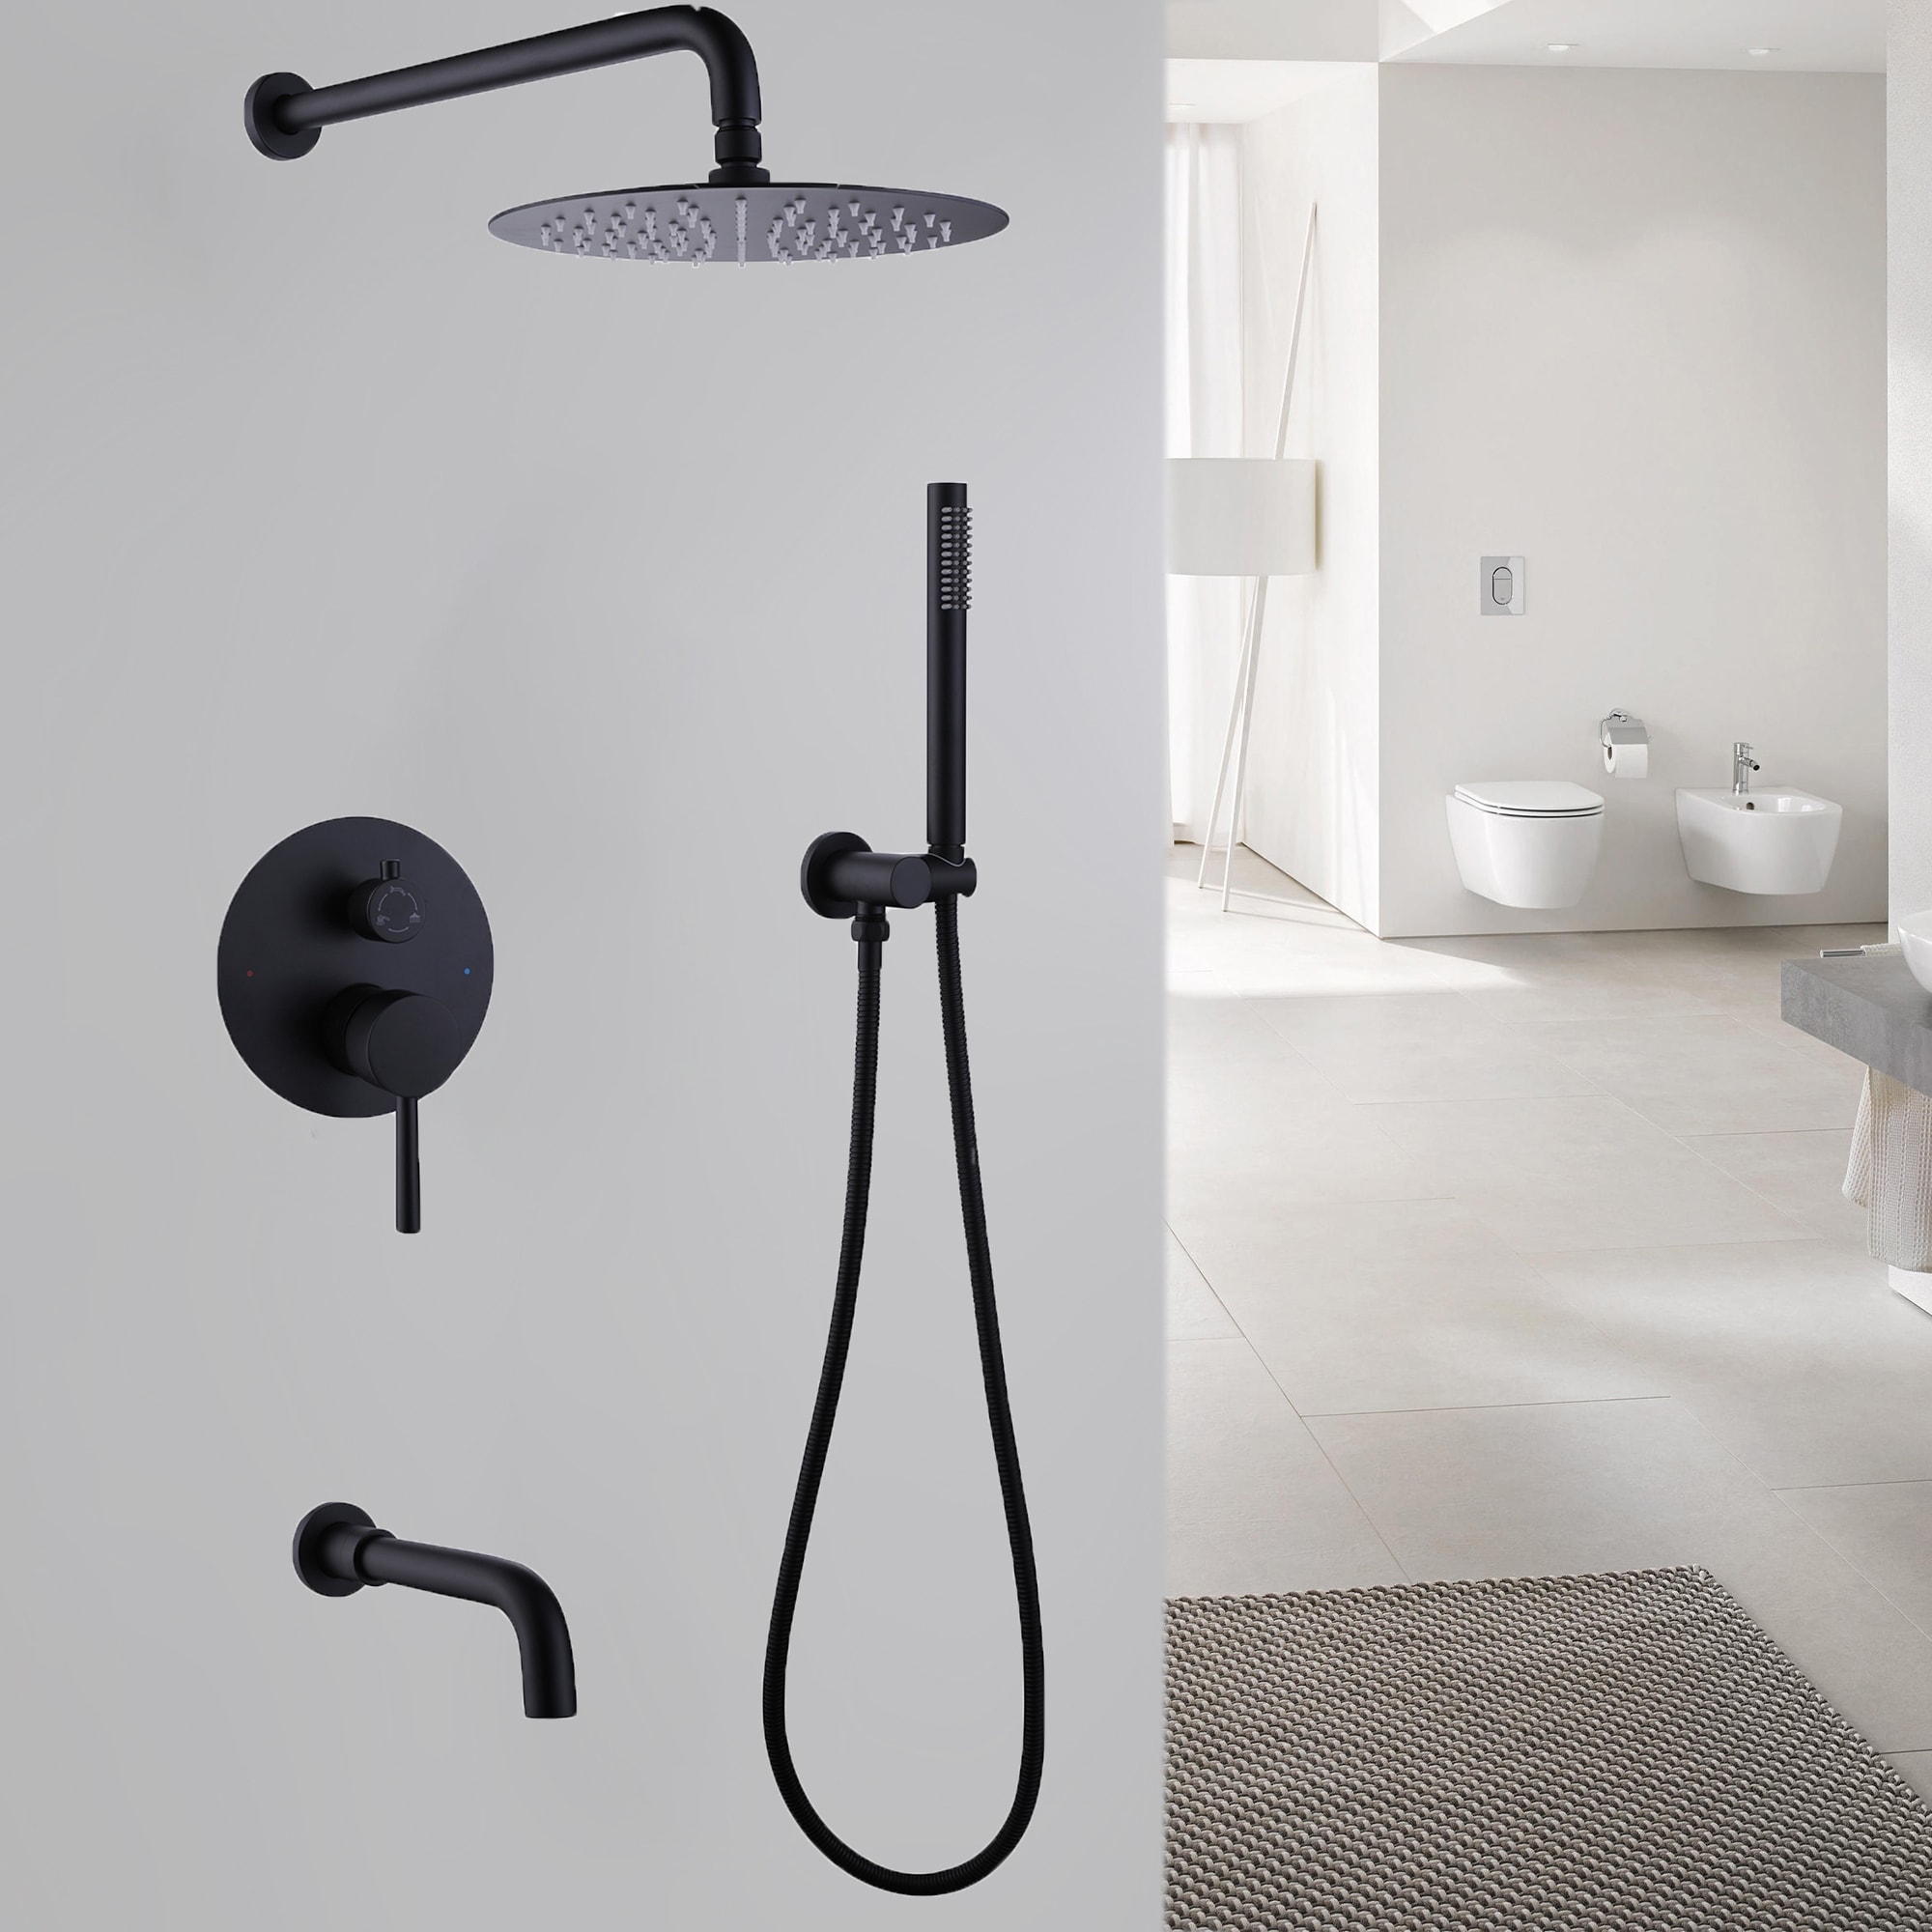 https://ak1.ostkcdn.com/images/products/is/images/direct/18049f6c75be2e1539943d39e7fcd61efc70d681/Wall-Mounted-Triple-Function-Complete-Shower-System-with-Rough-in-Valve.jpg